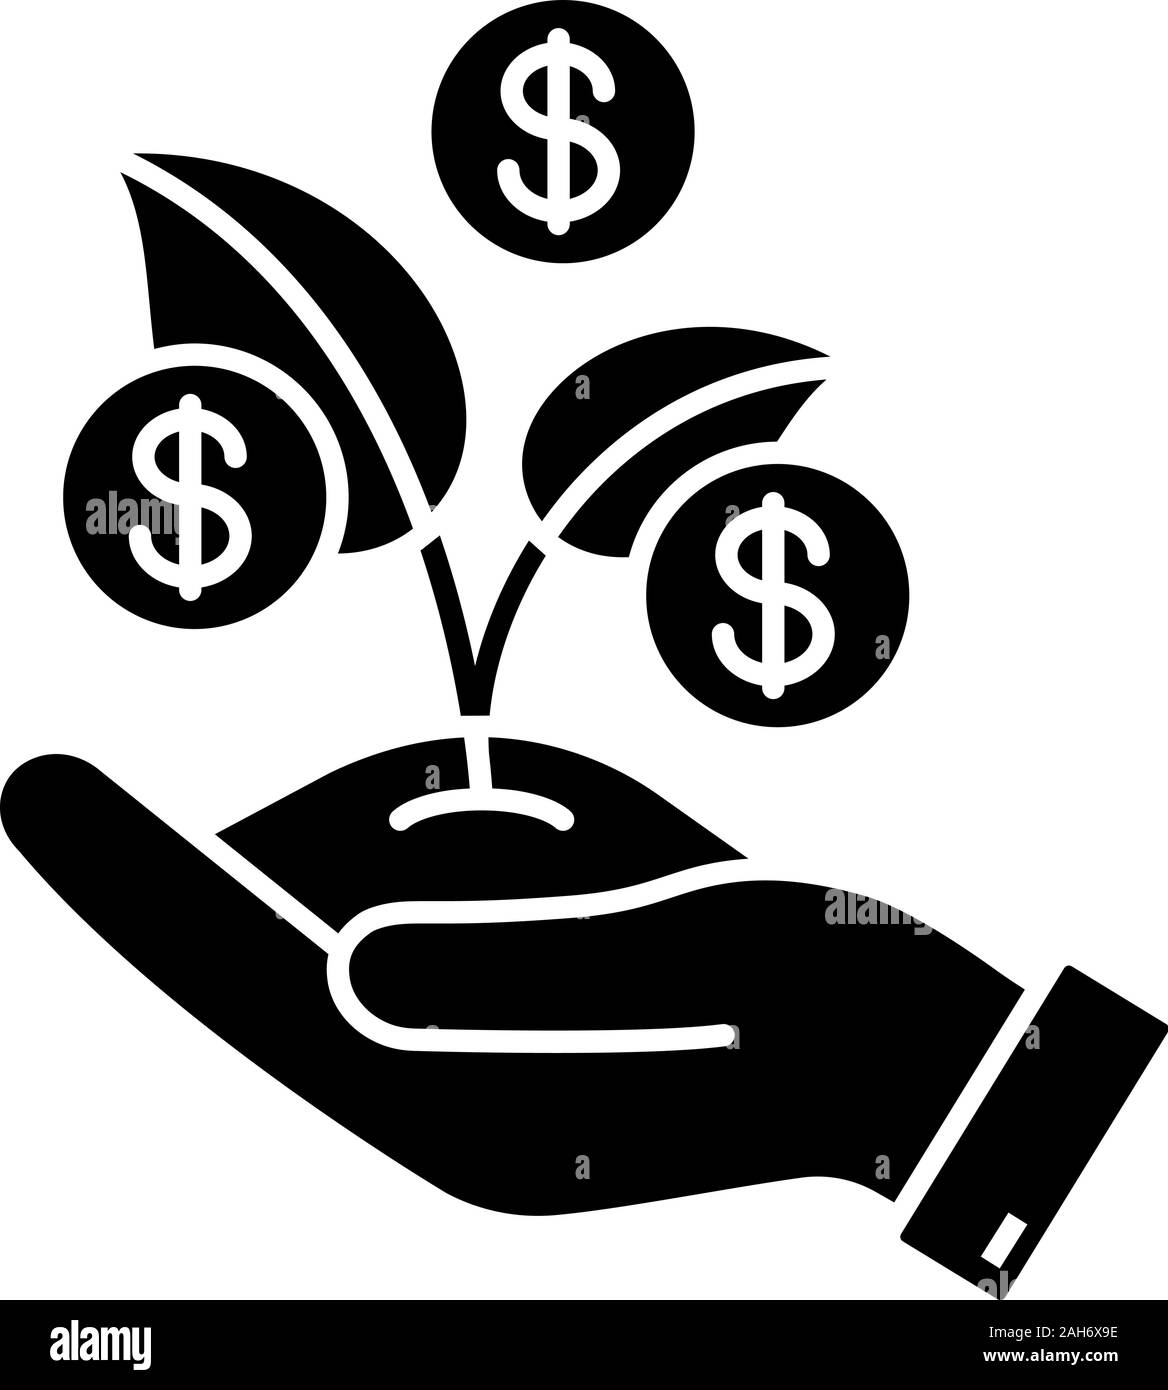 Seed money glyph icon. Seed funding, capital. Business development. Hand holding sprout and dollar coin. Early investment. Financing, budgeting. Negat Stock Vector